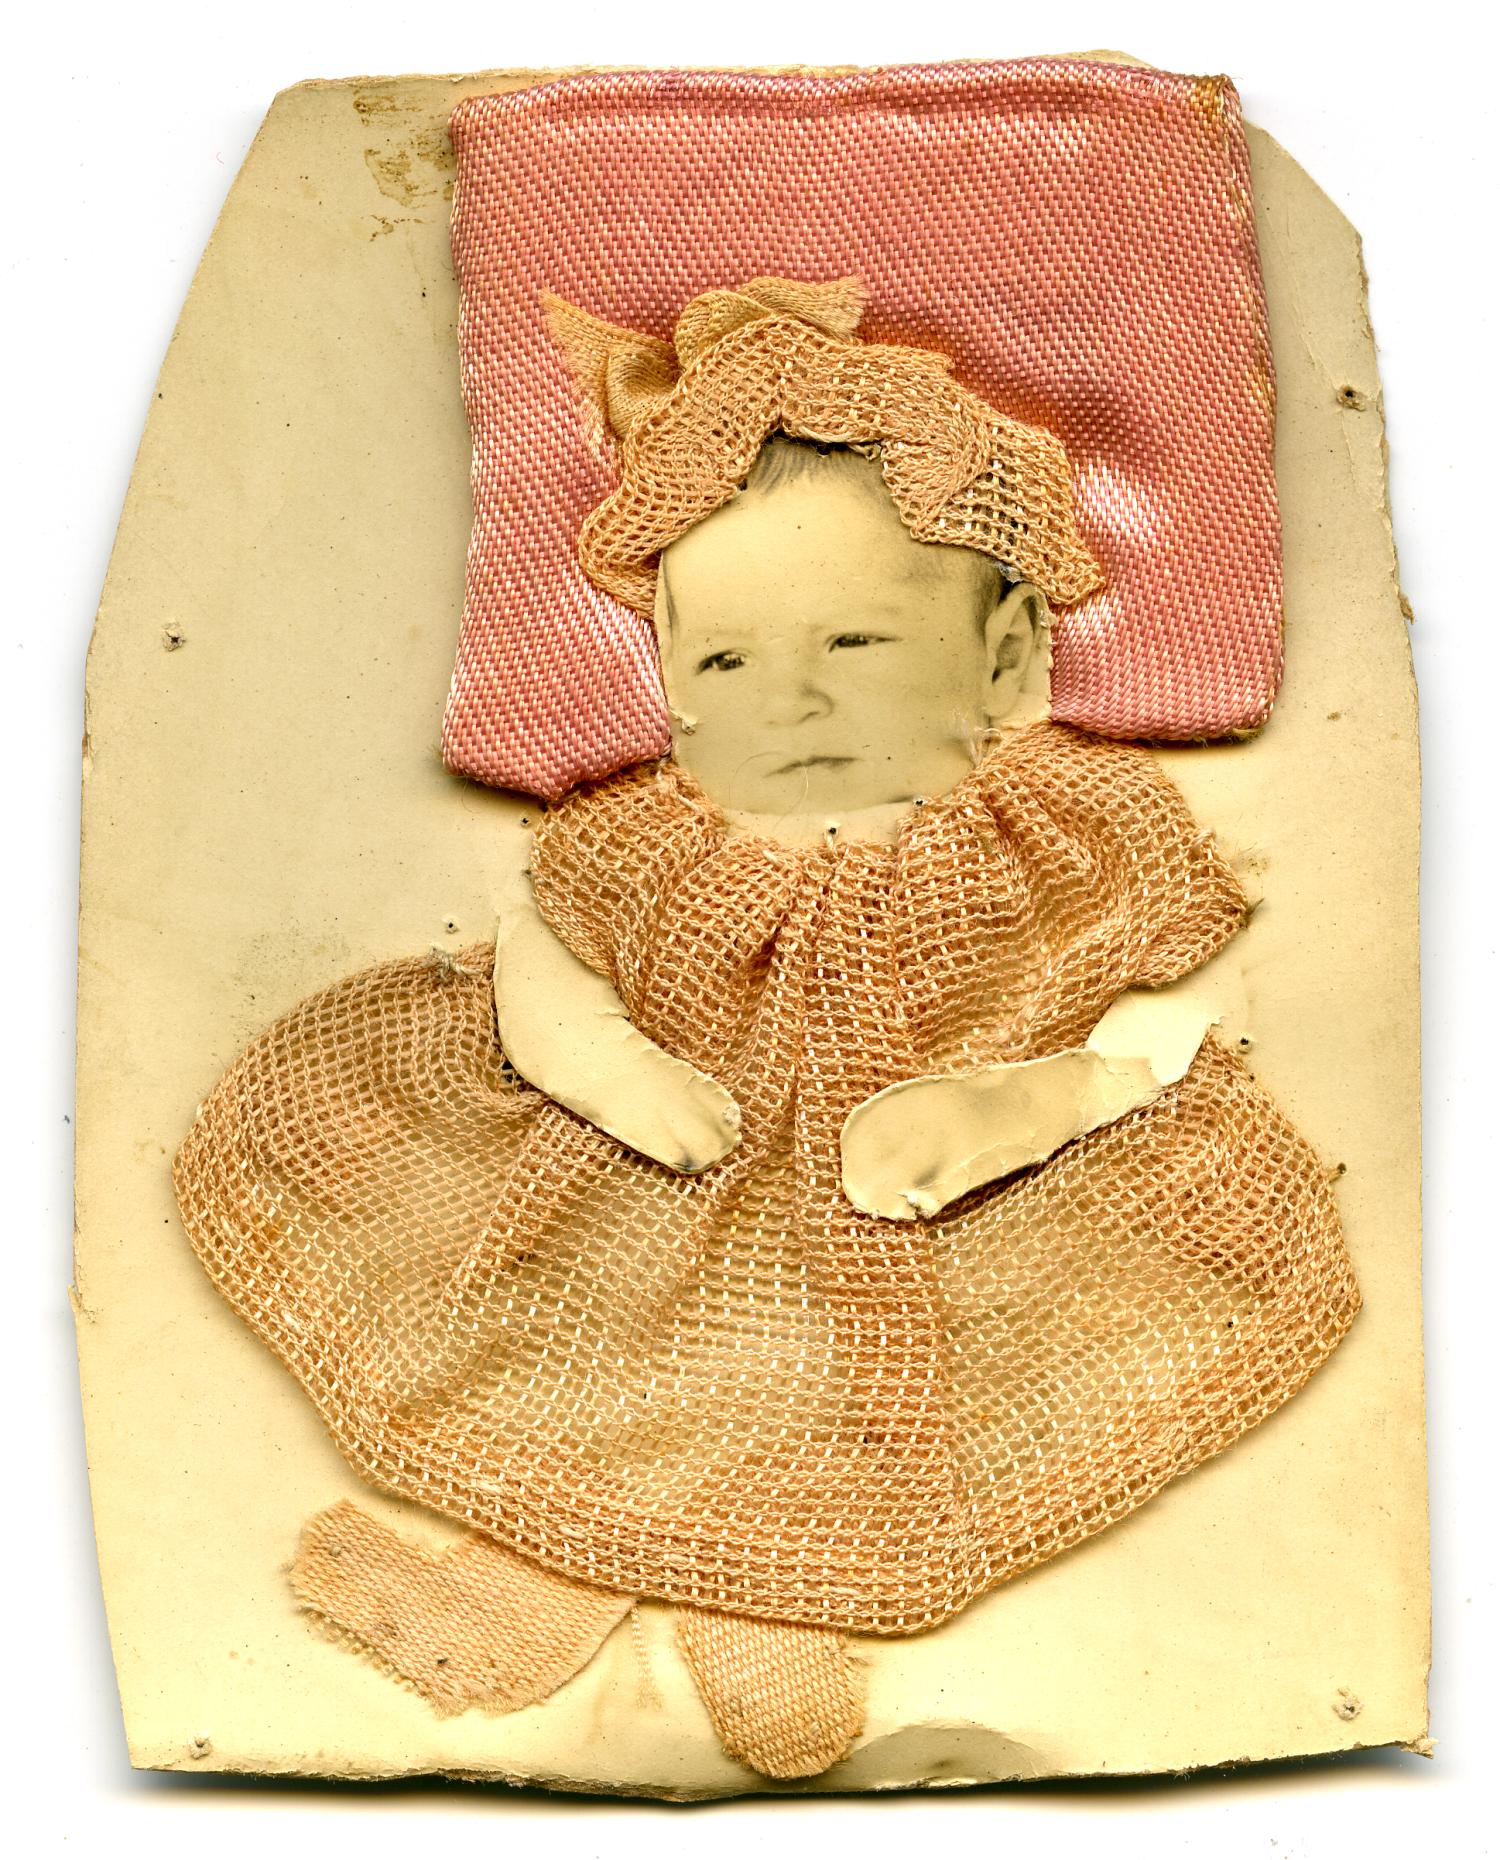 [Photograph of a Baby Wearing an Embroidered Dress]
                                                
                                                    [Sequence #]: 1 of 2
                                                